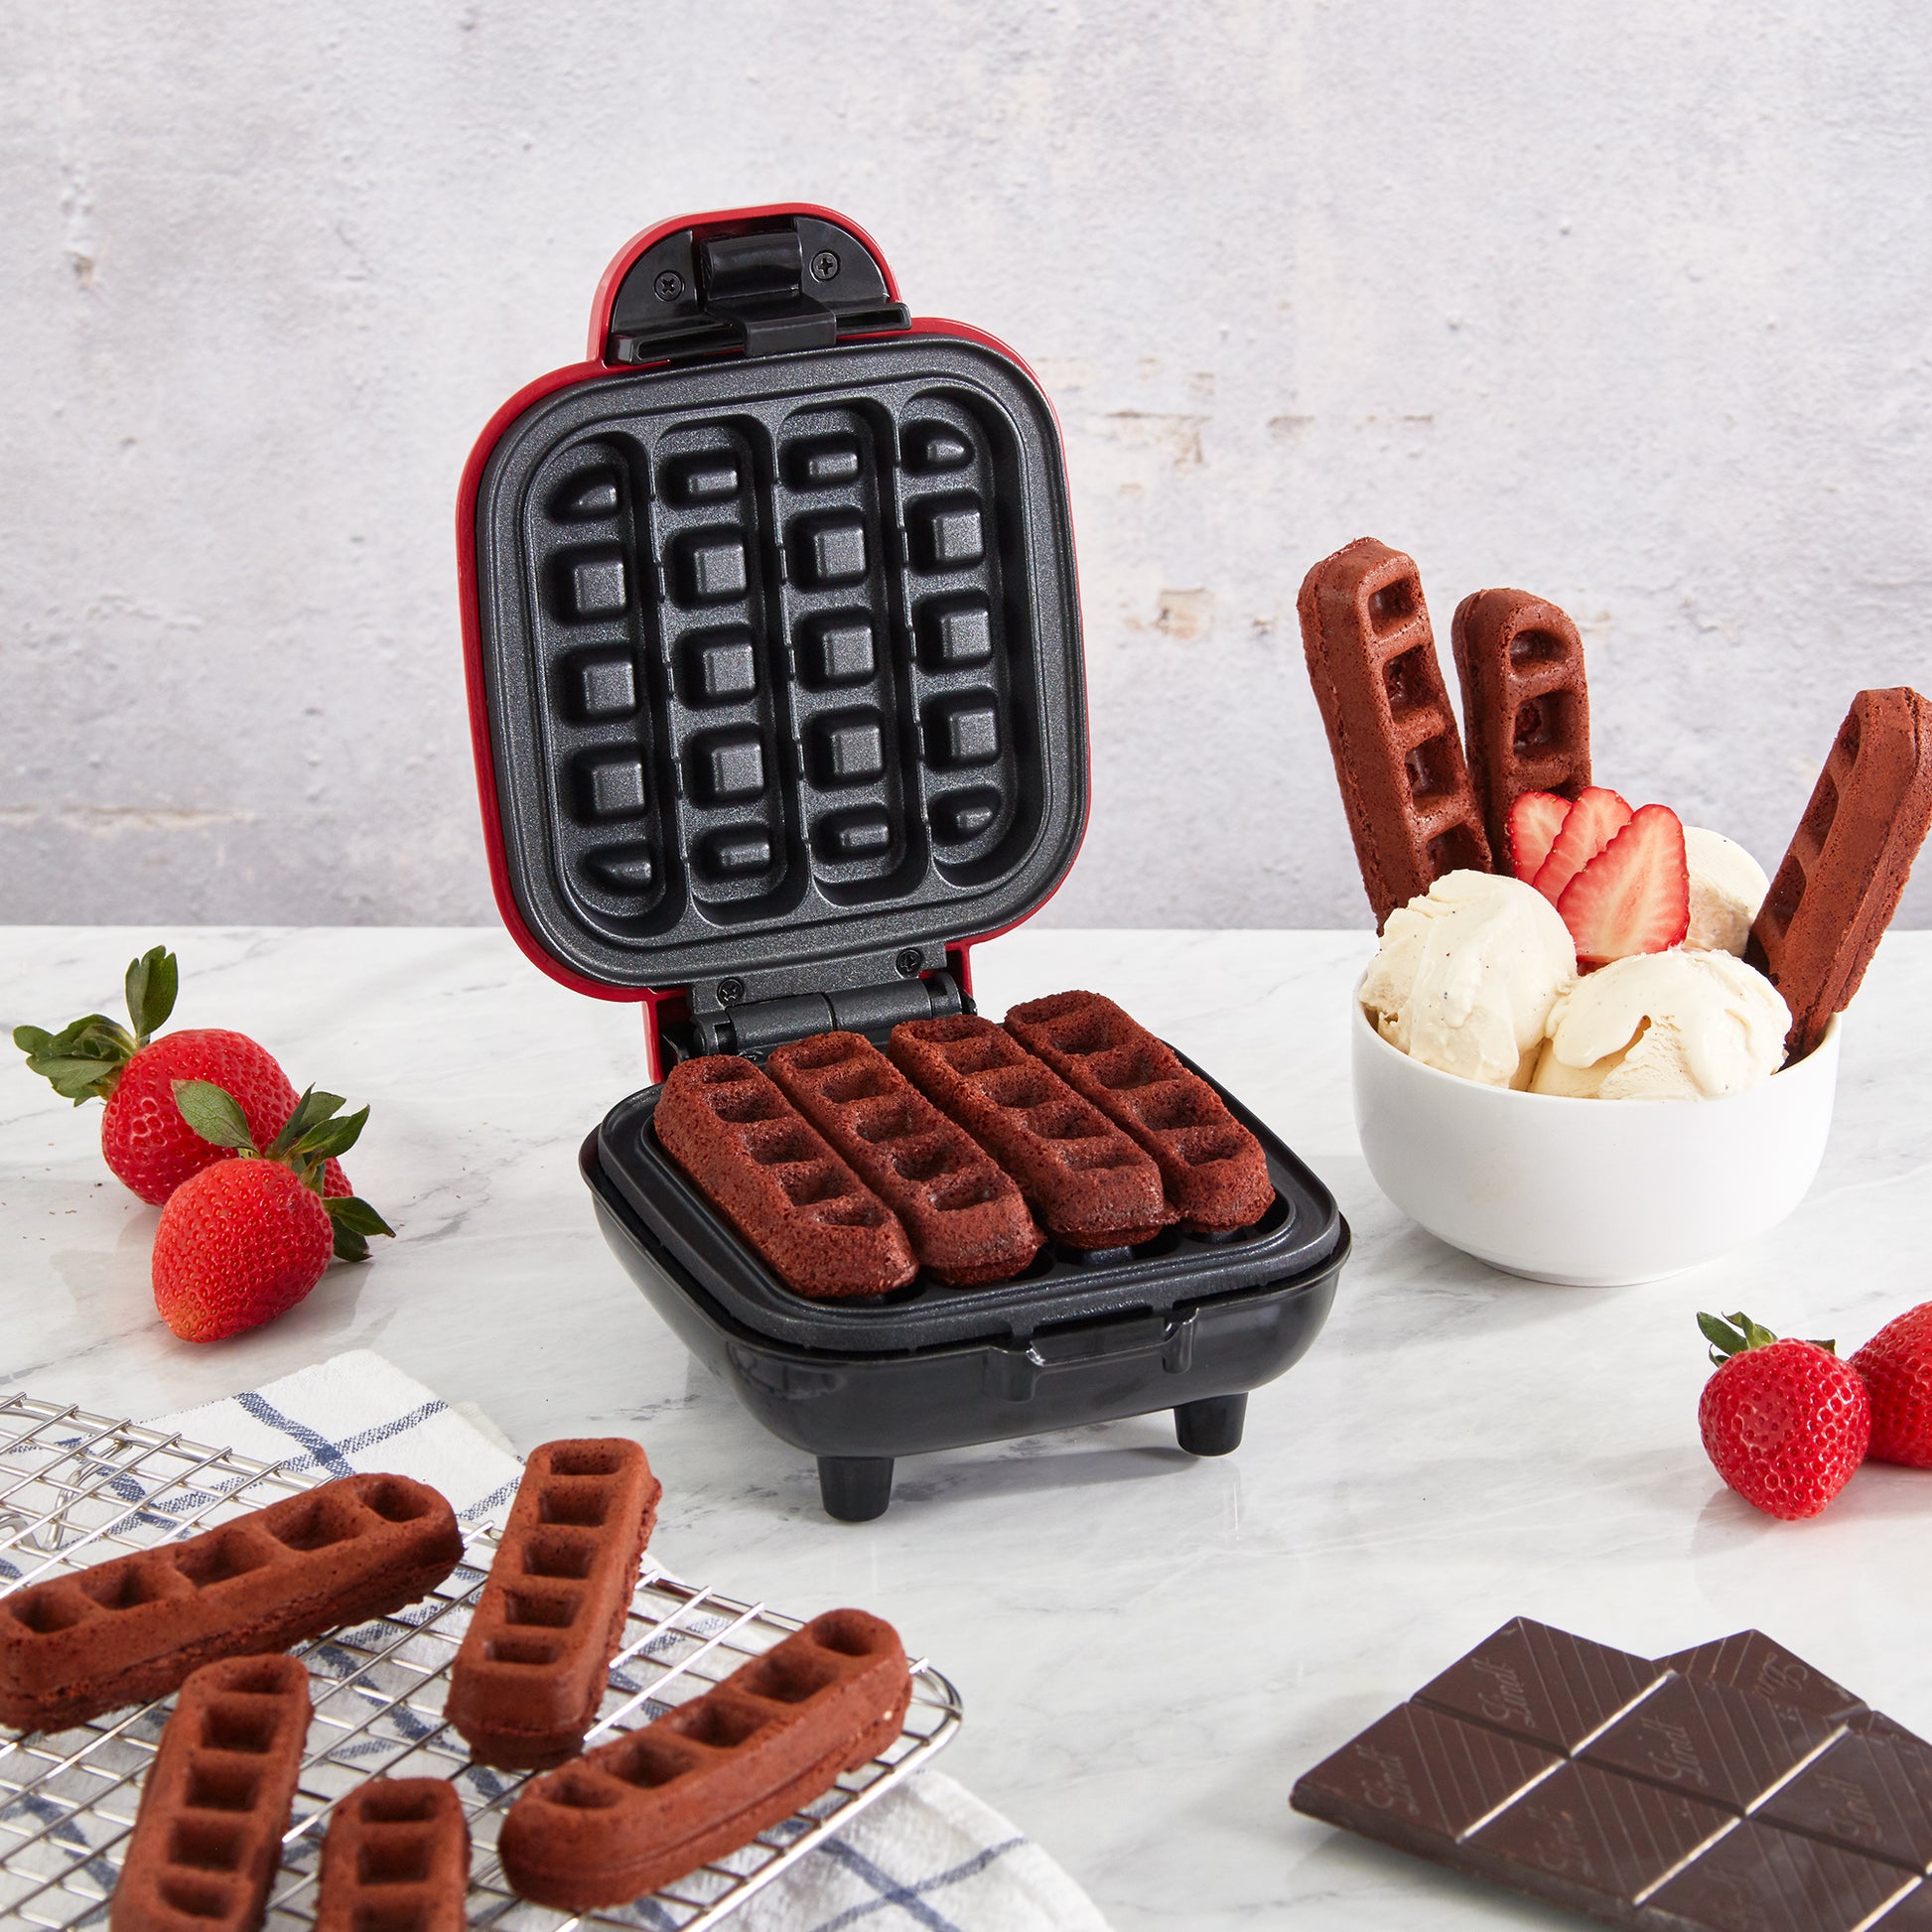 FineMade Waffle Stick Maker, Mini Waffle Maker Iron, Makes 6 Waffle Sticks,  Ideal for Breakfast, Snacks, Desserts and More